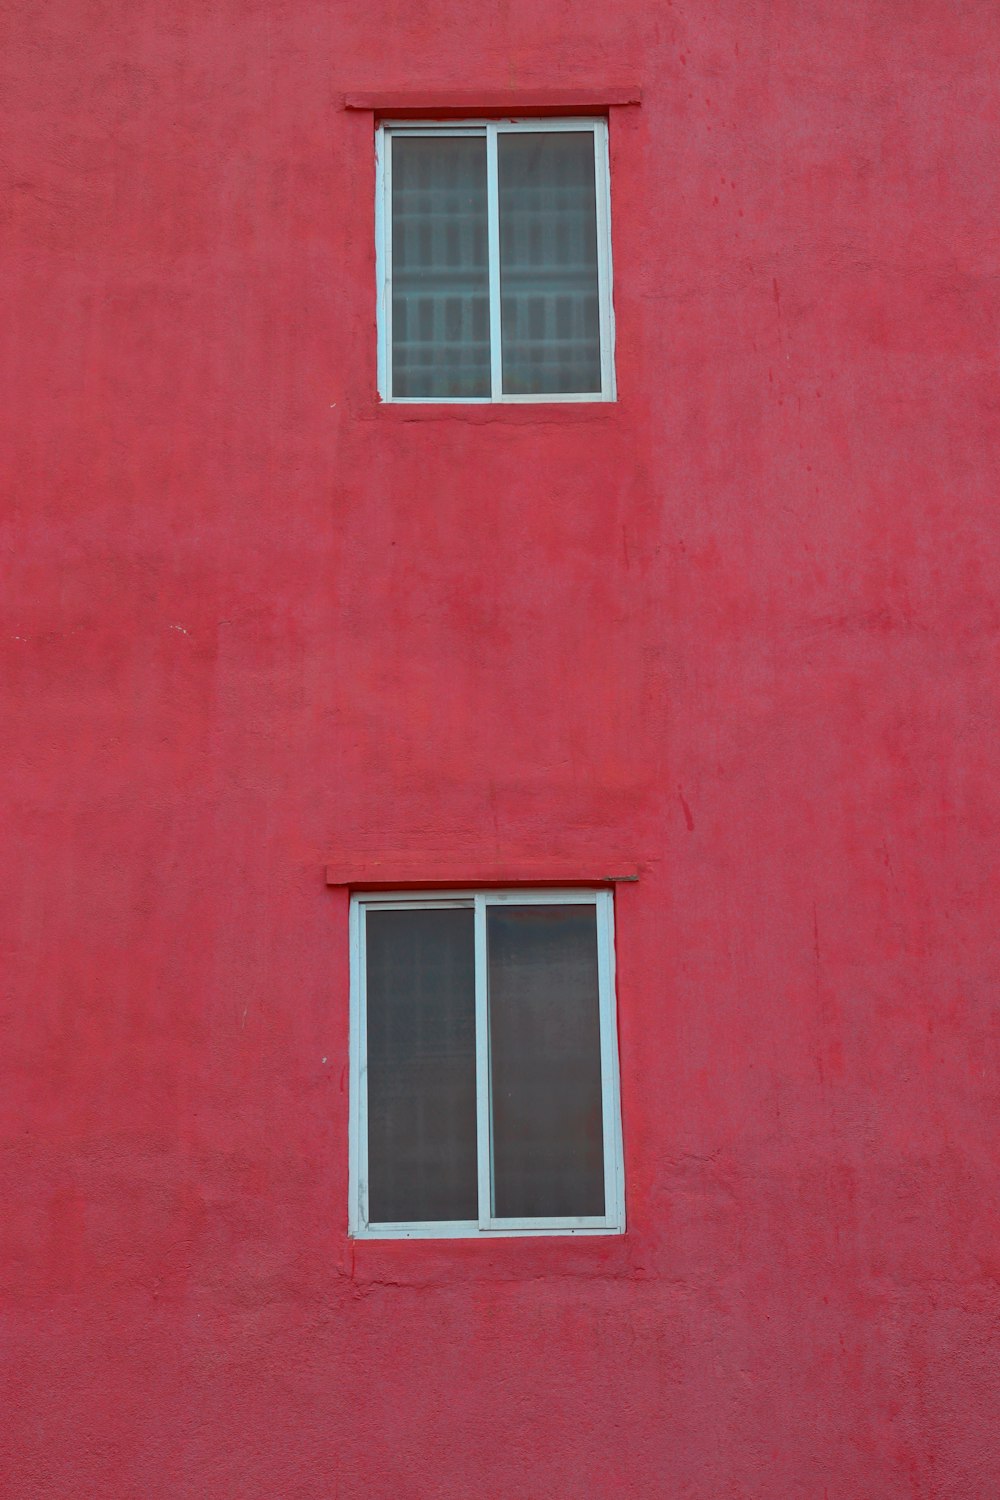 a red building with two windows and a clock